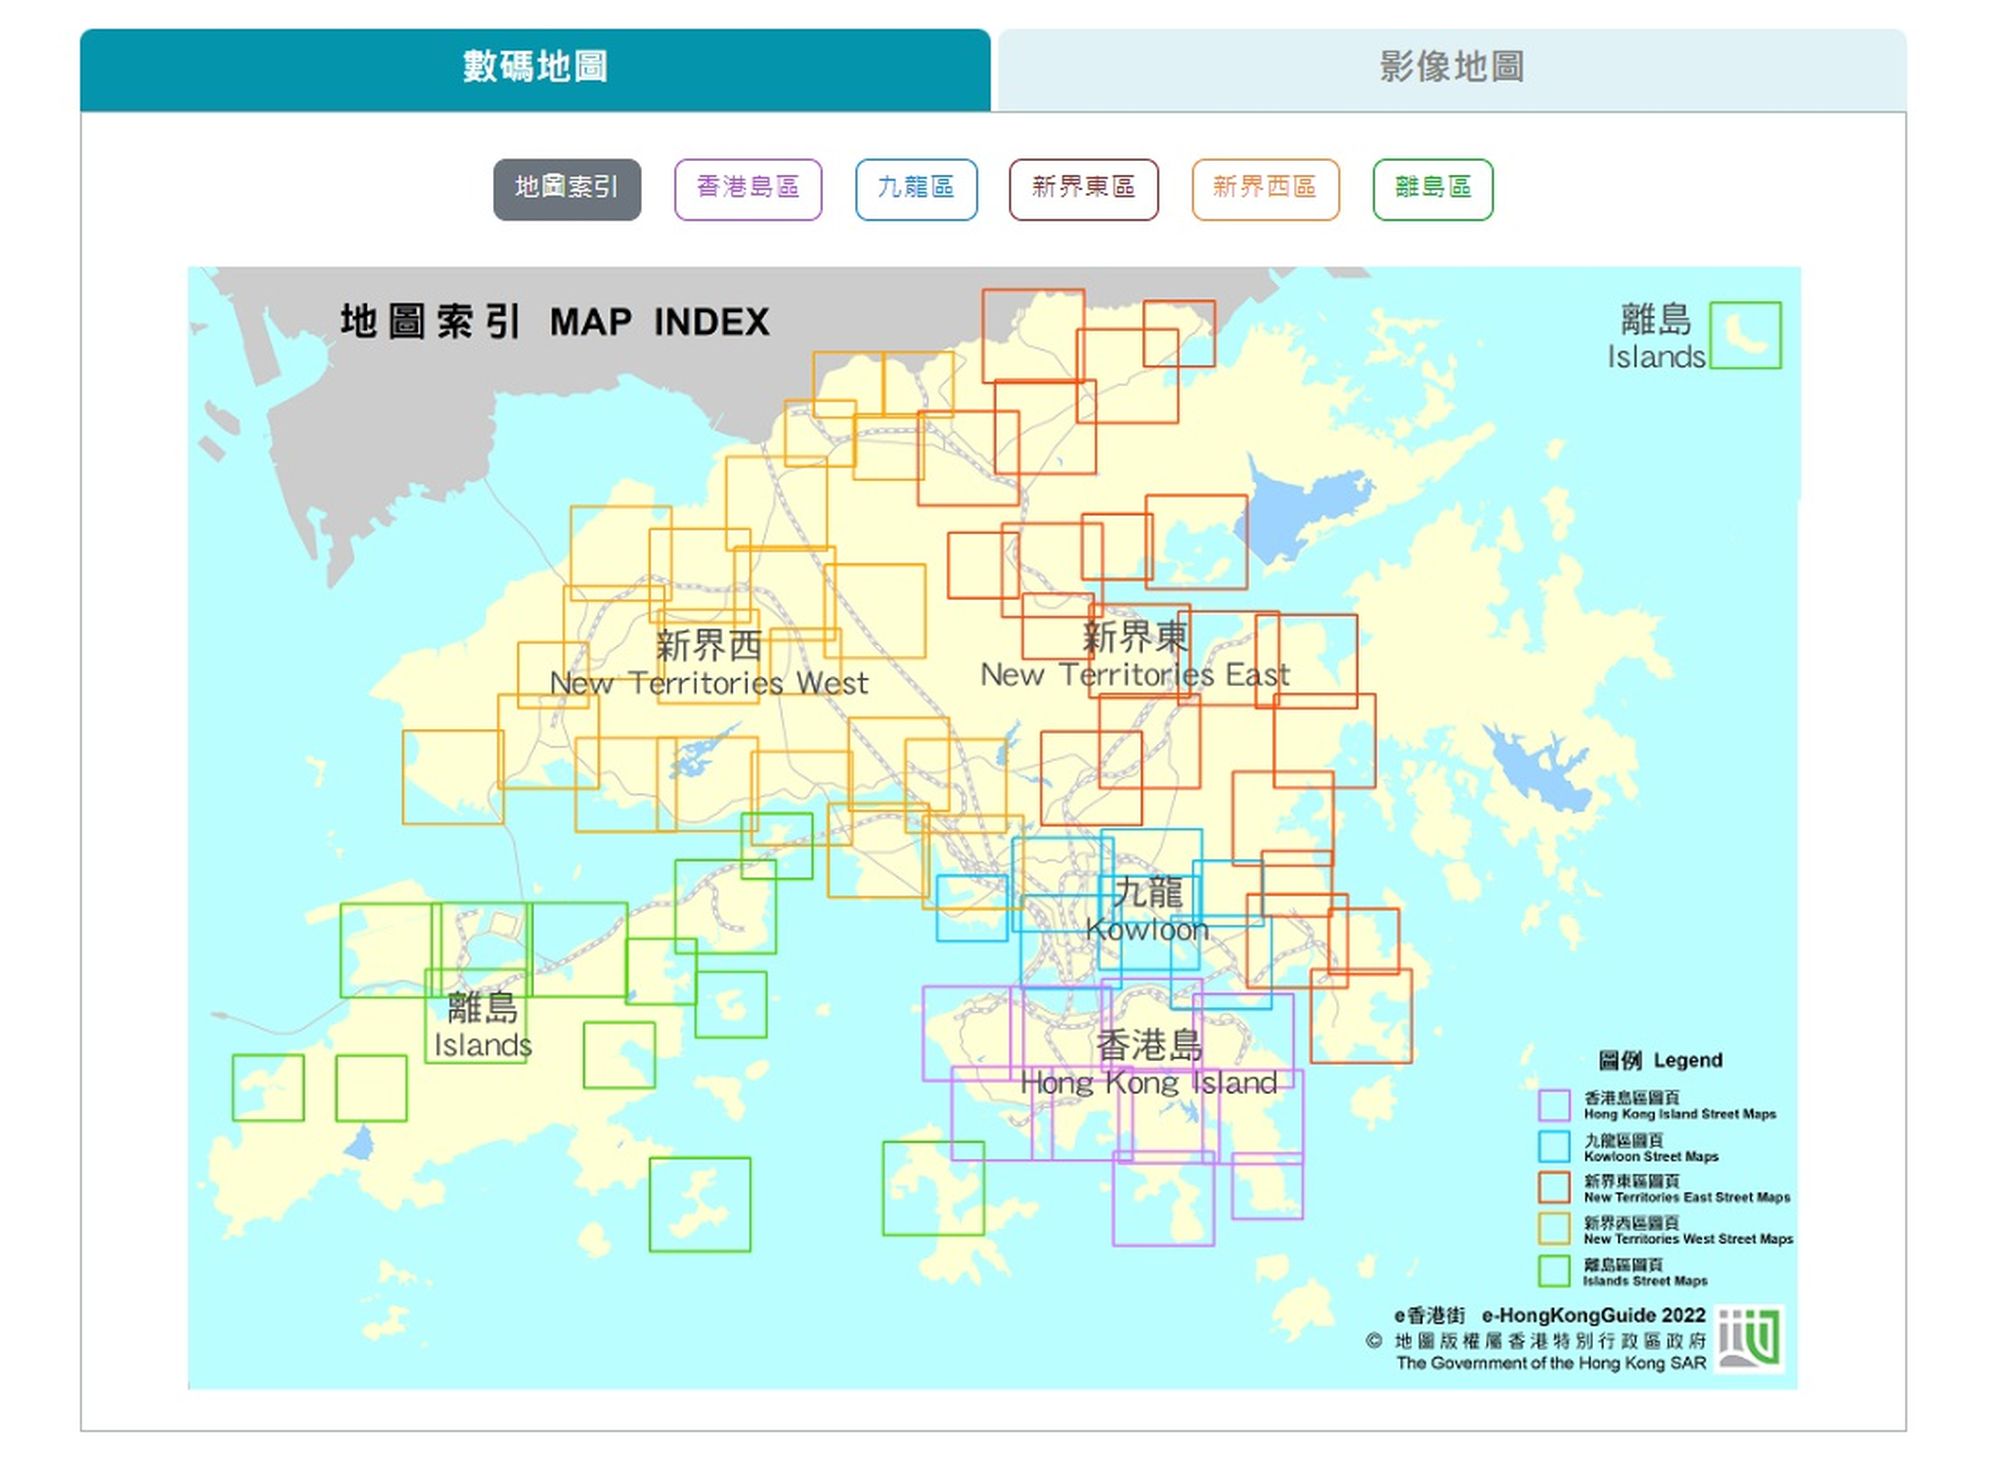 The e-HongKongGuide, an electronic guide map, is available at the website of the LandsD for public browsing and free download.